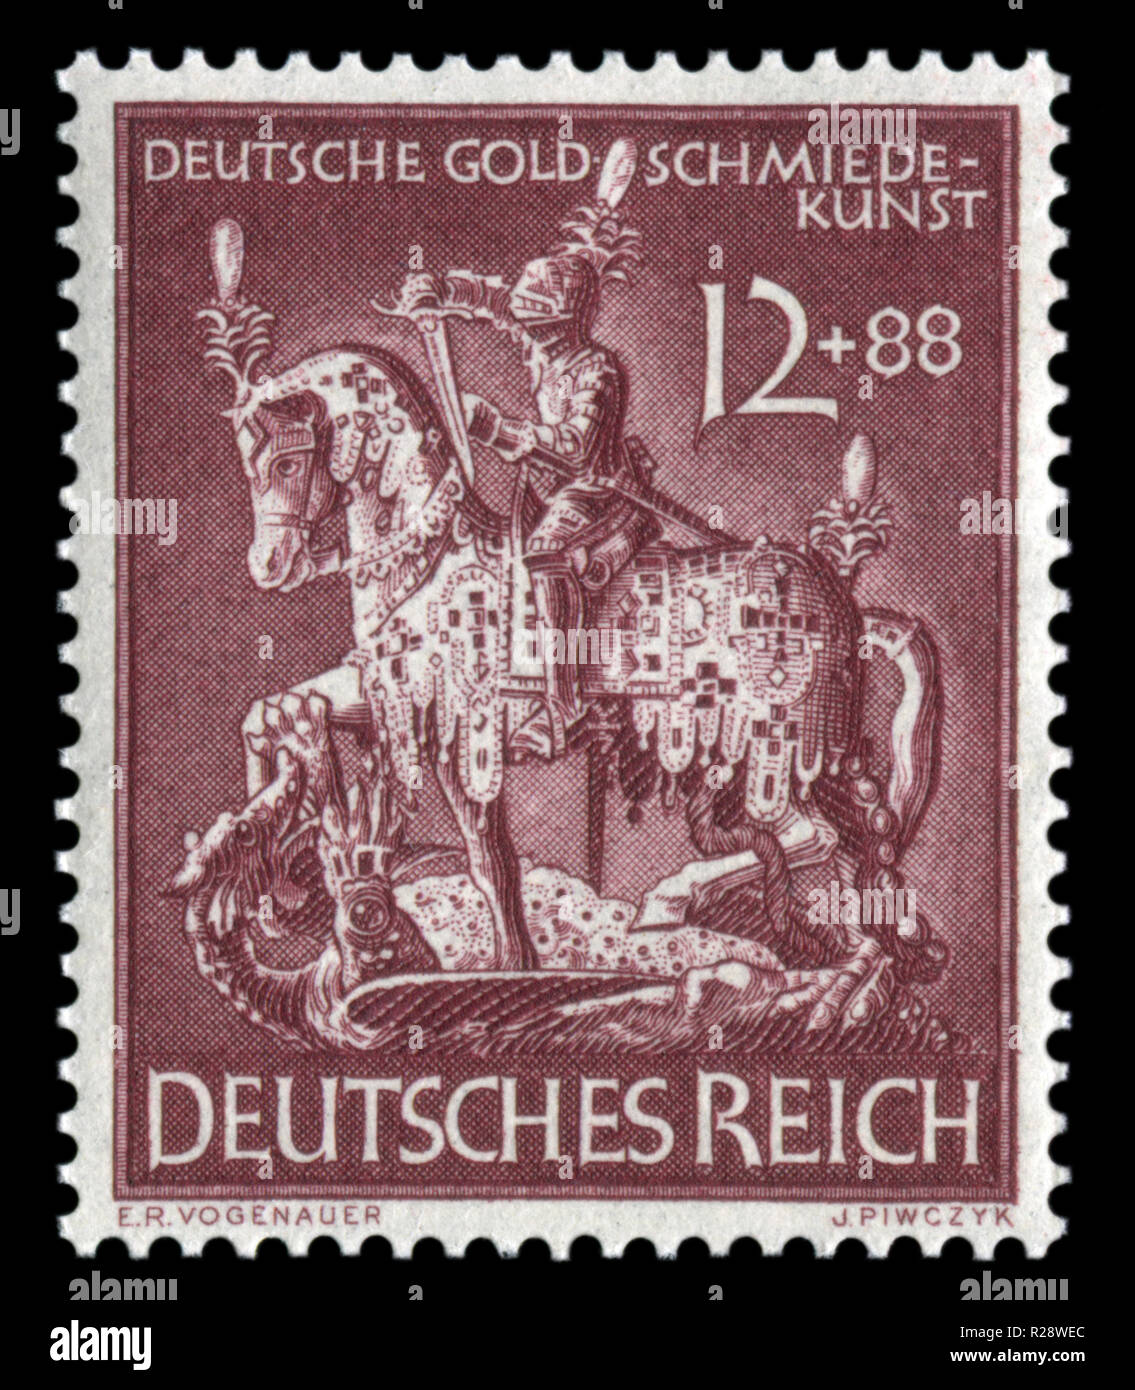 German historical stamp: Jewelry figure of St. George, the victorious dragon. 11th anniversary of the German national society of Jewelers, 1943 Stock Photo